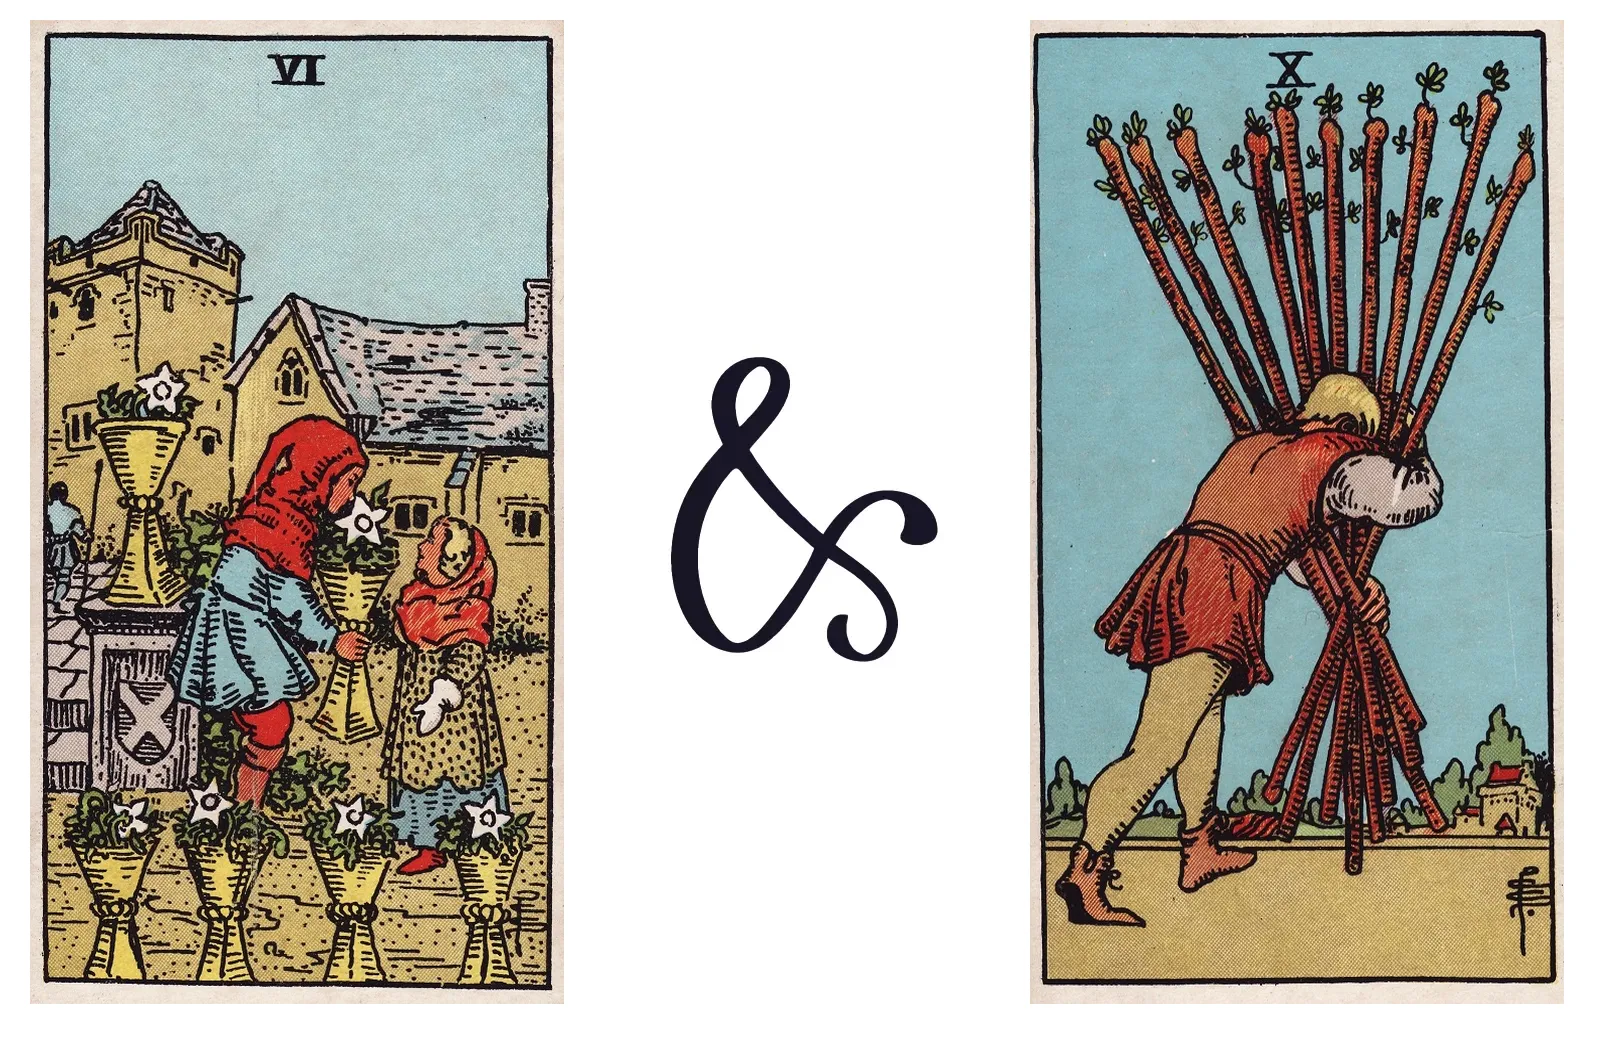 Six of Cups and Ten of Wands